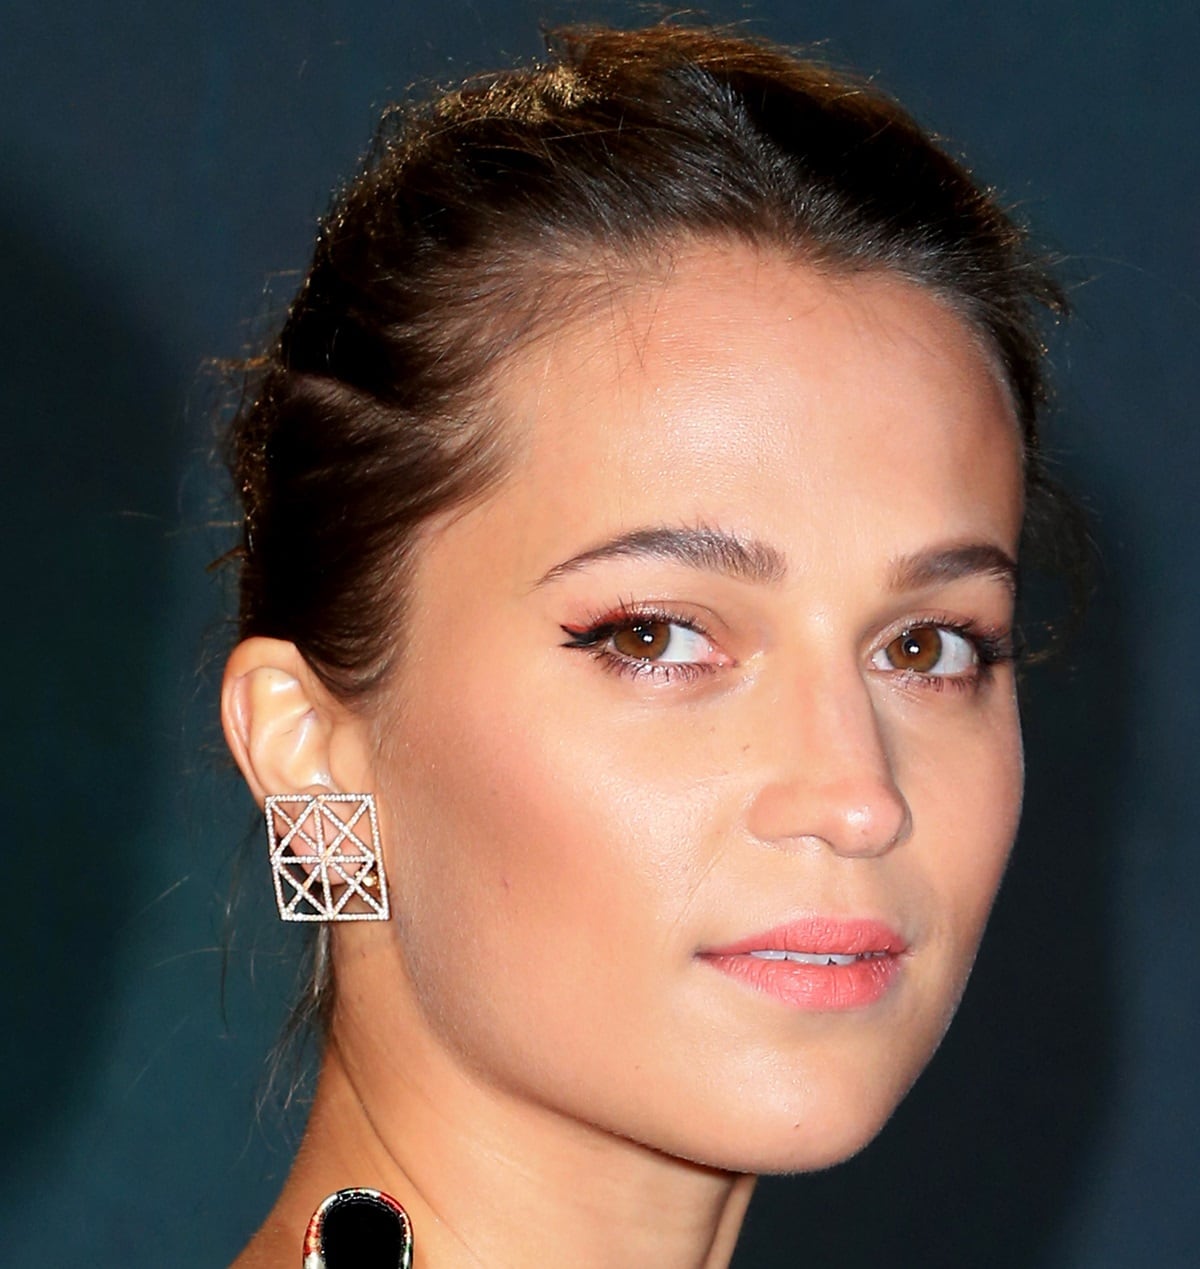 Despite being born and raised in Sweden, Alicia Vikander's brown hair and olive skin have led to misconceptions about her Swedish heritage